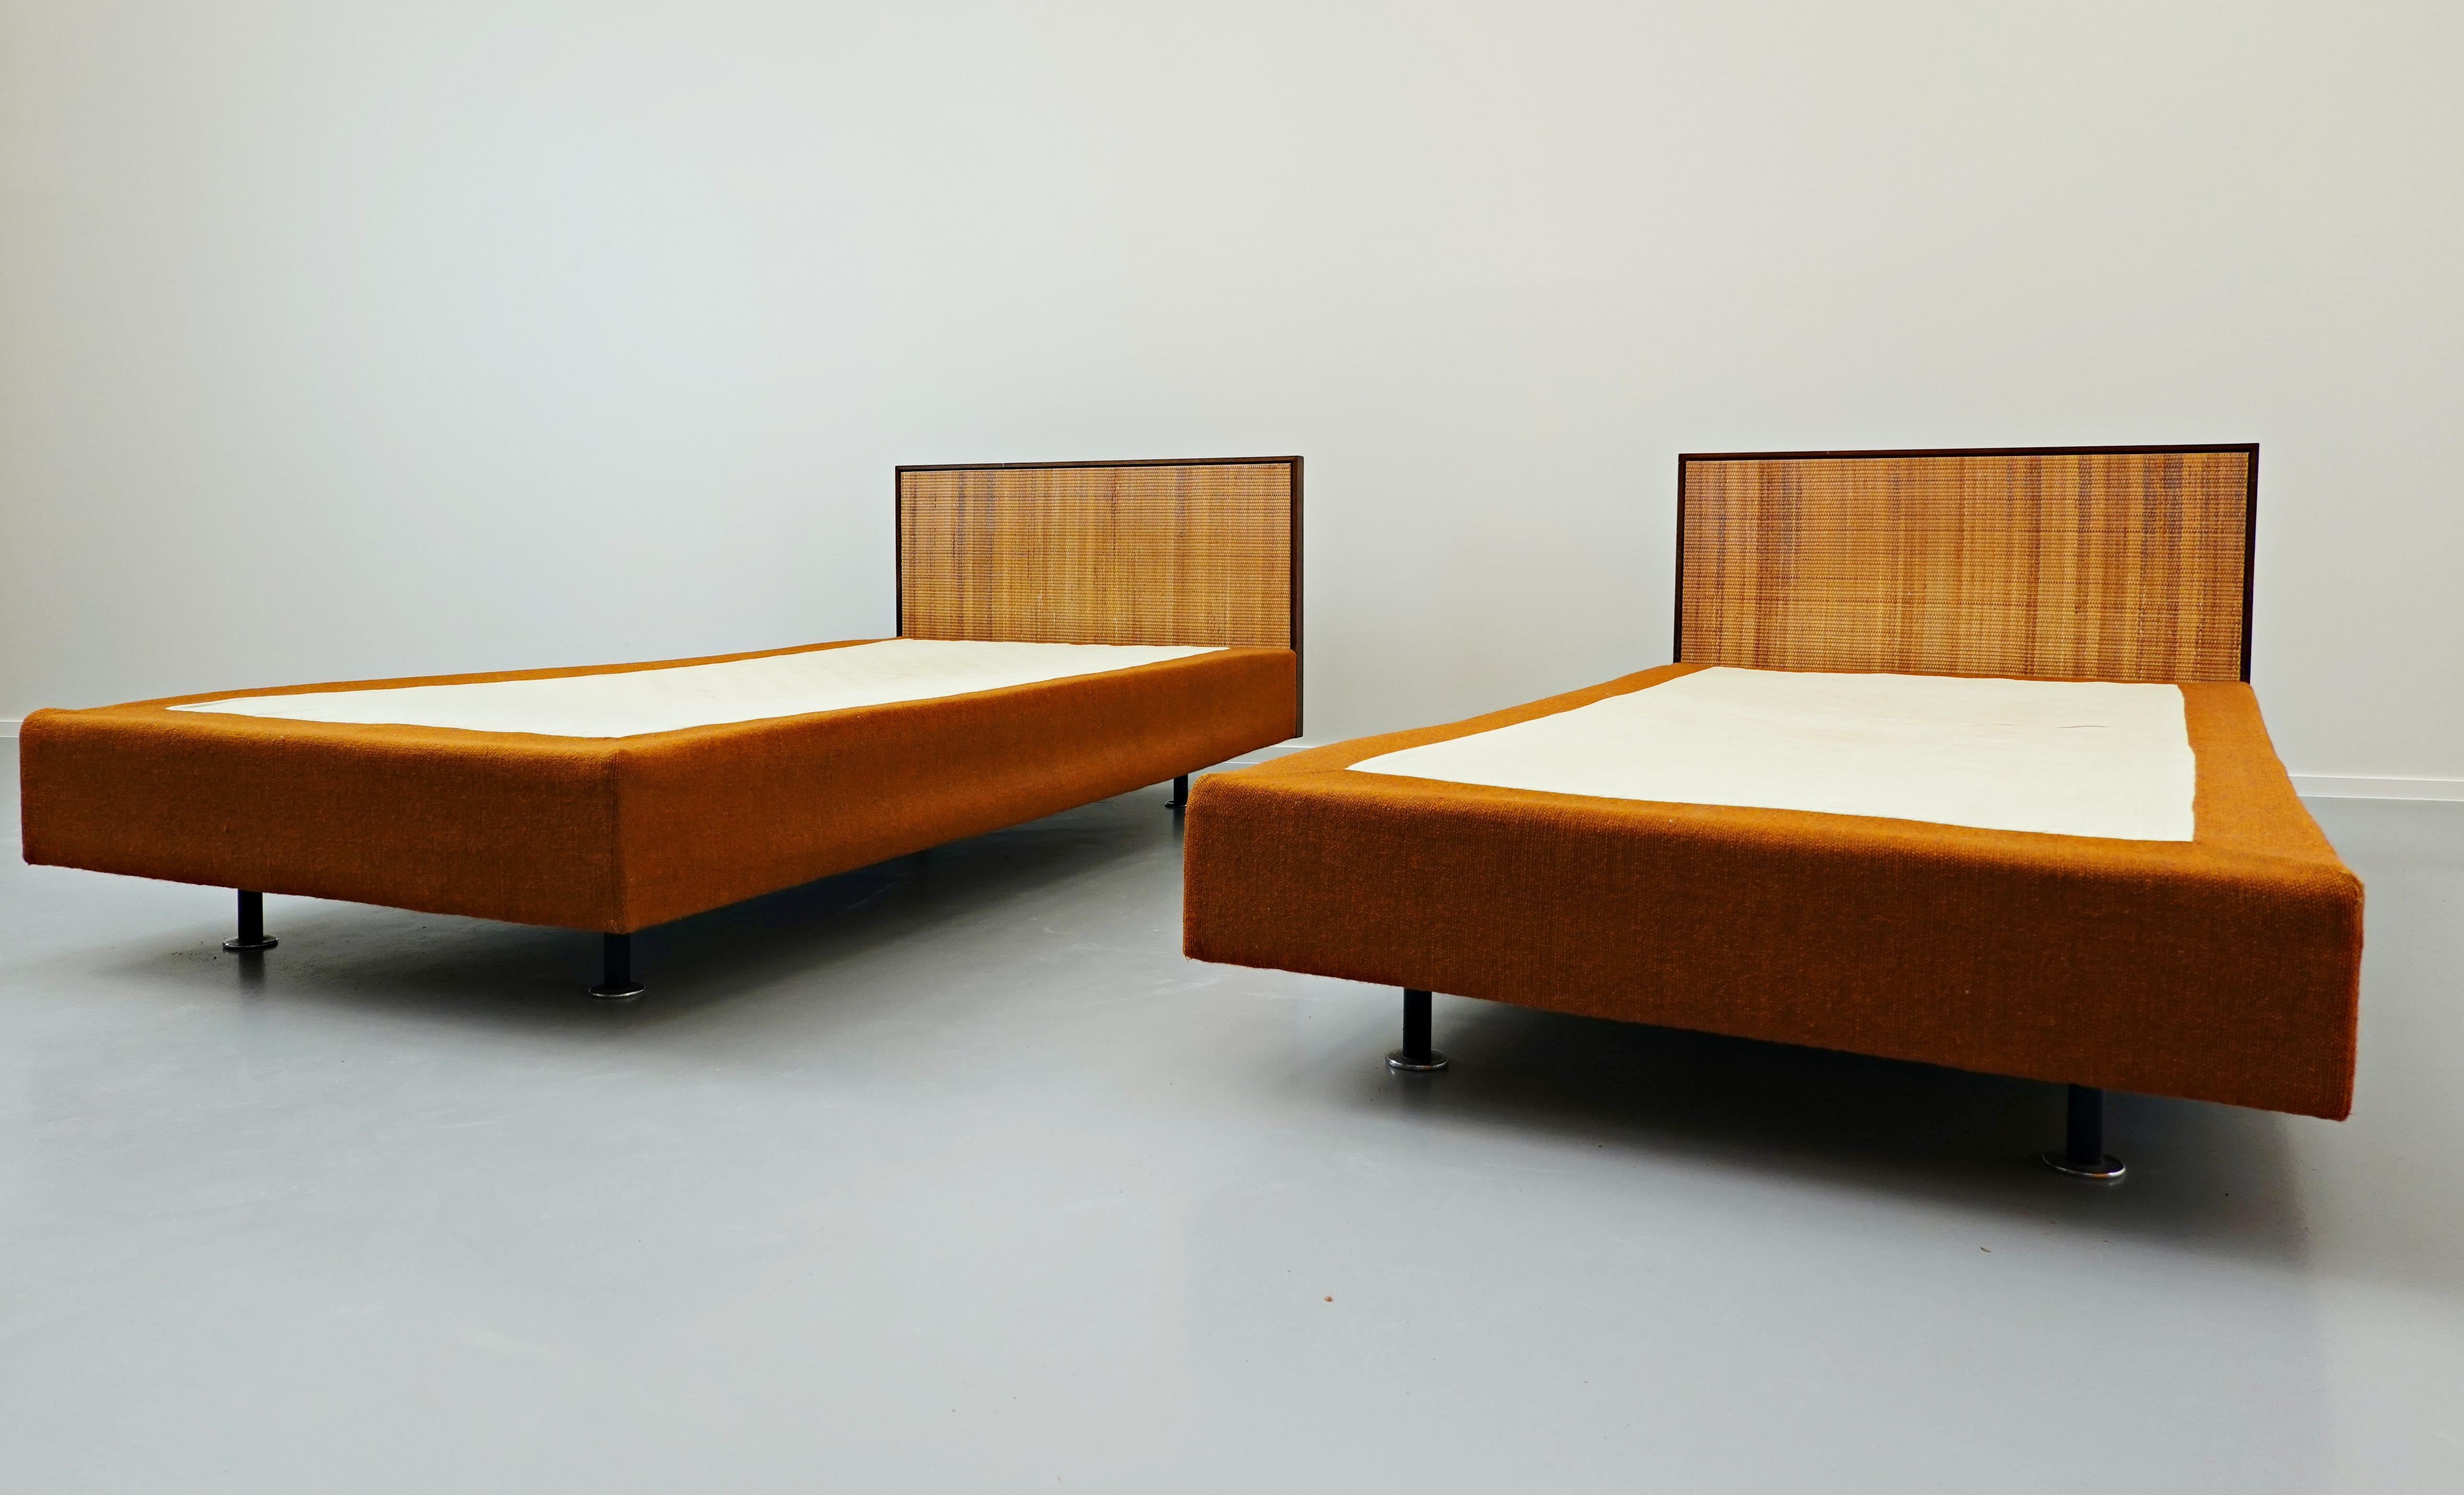 20th Century Mid-Century Modern Pair of Beds, Knoll, 1950s